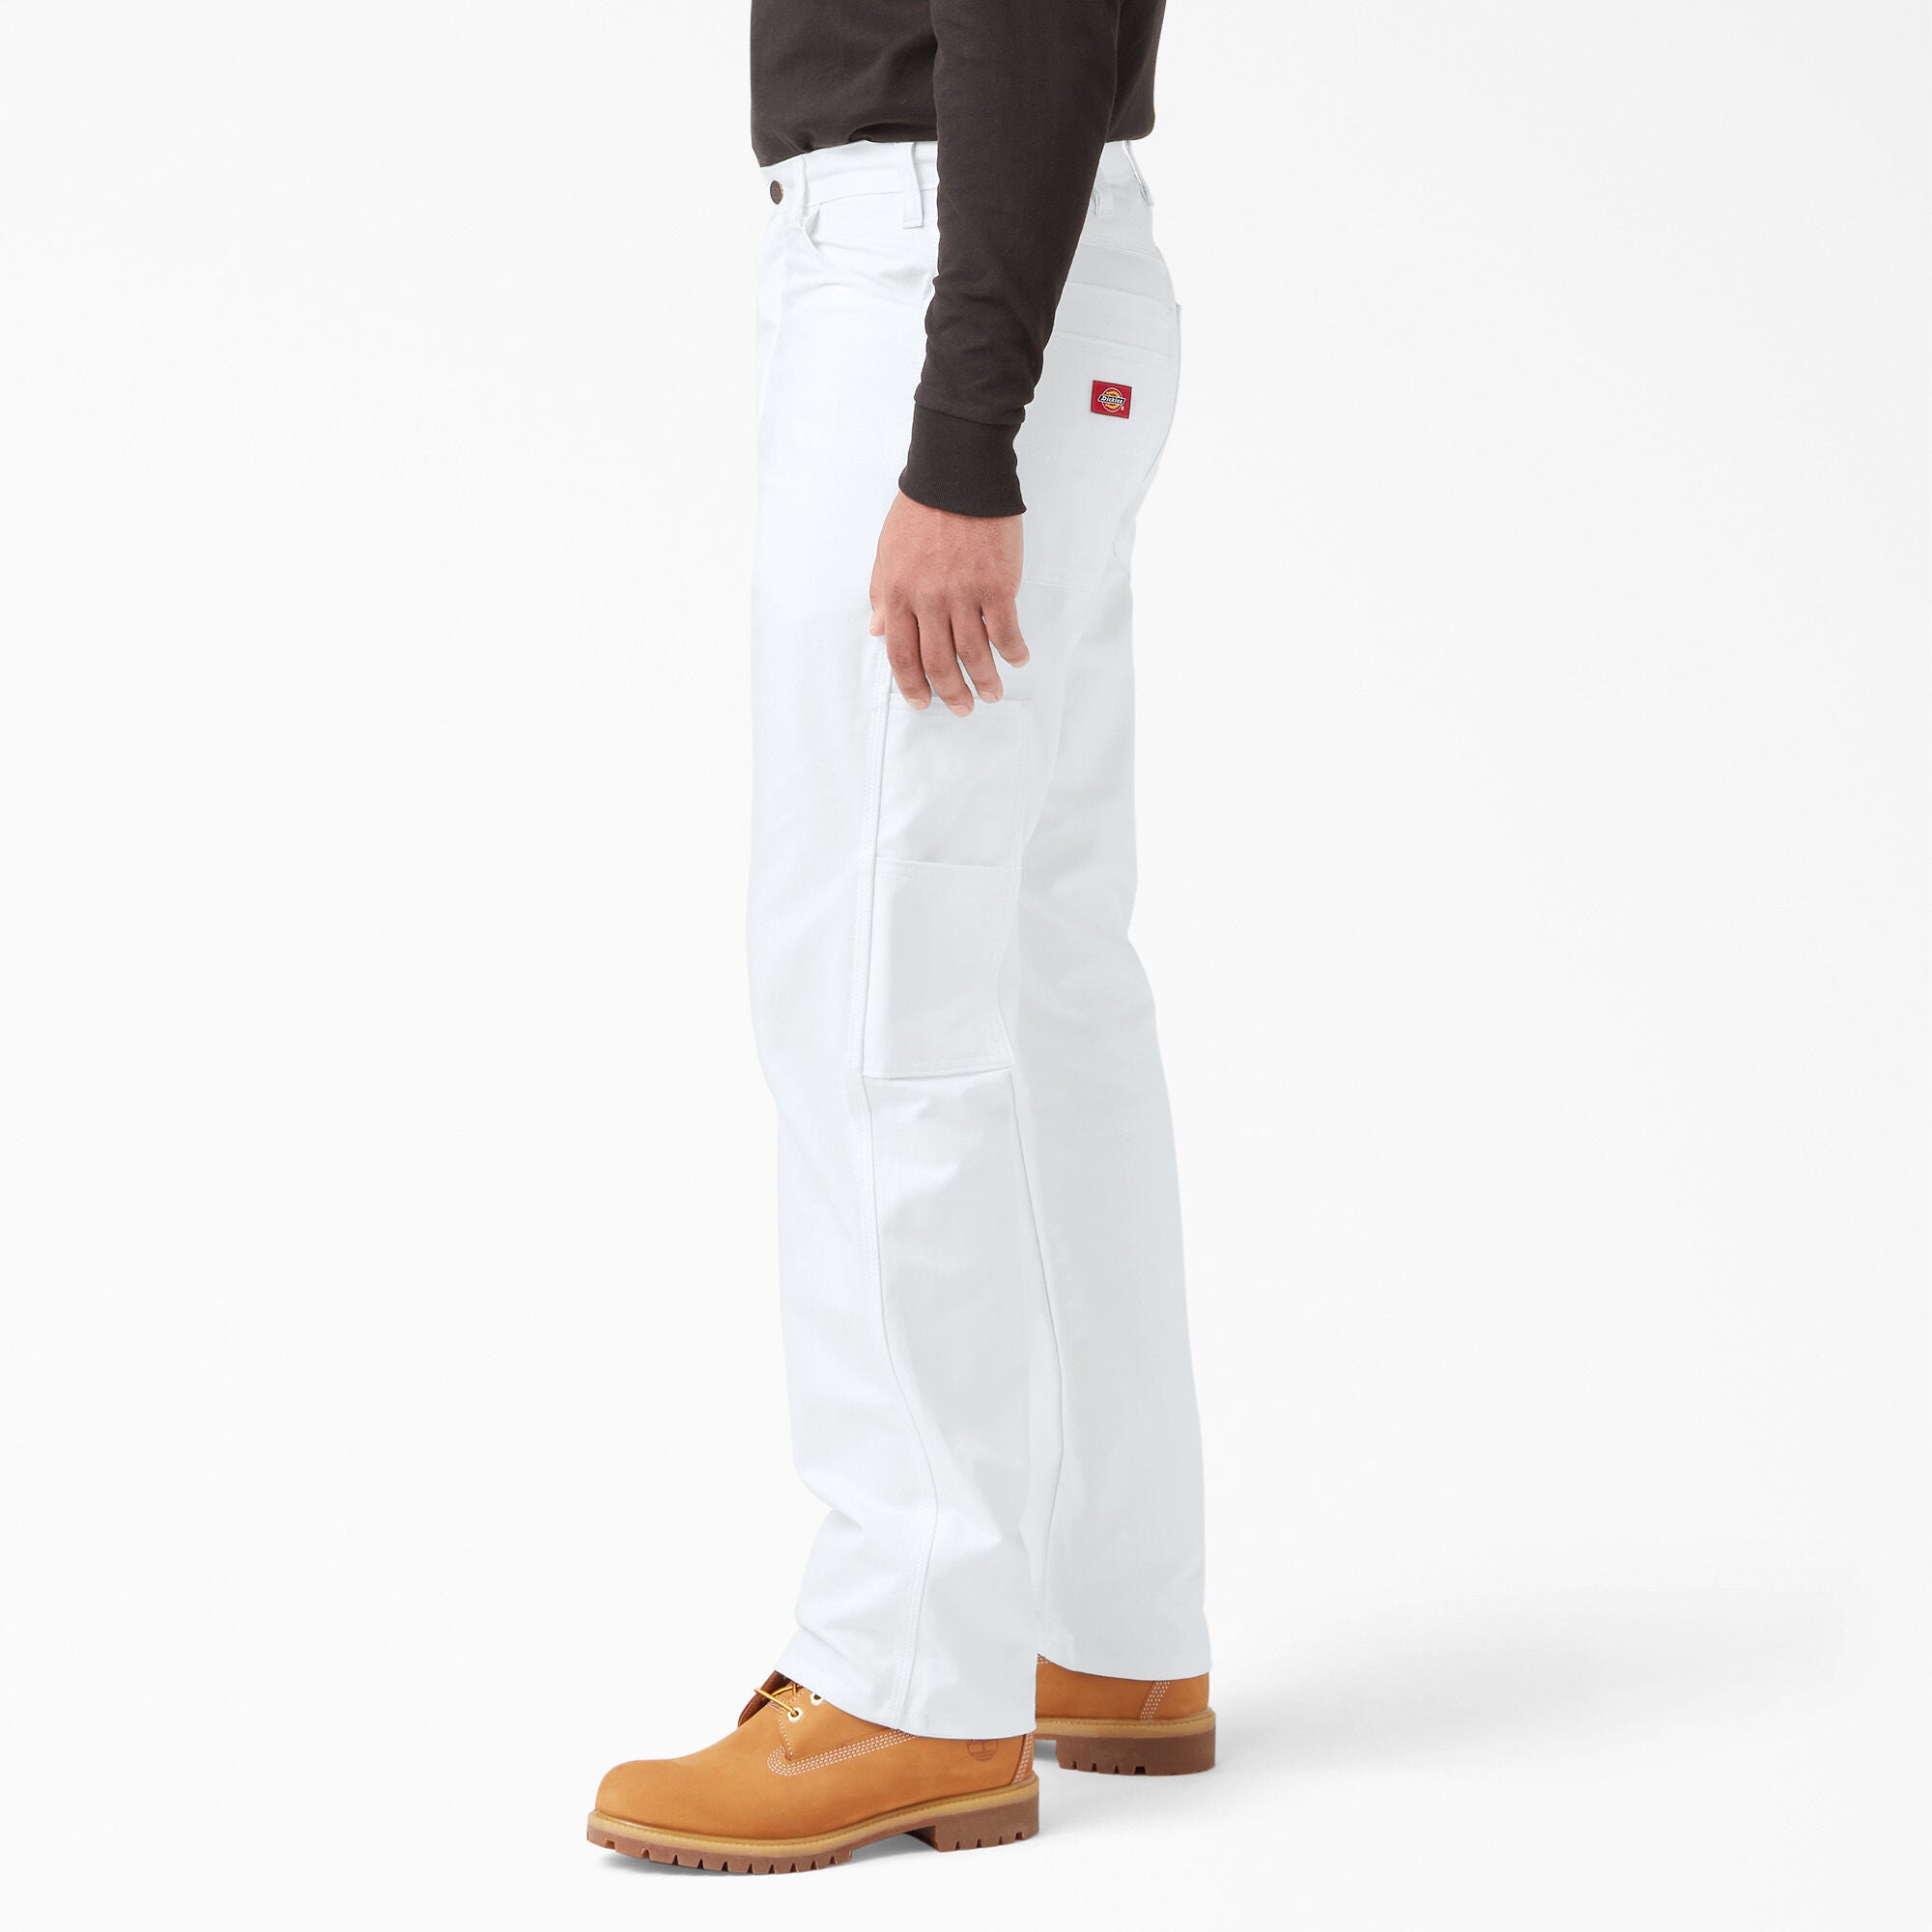 Dickies Utility Painters Pants Relaxed Fit (White) - Apple Valley Emporium